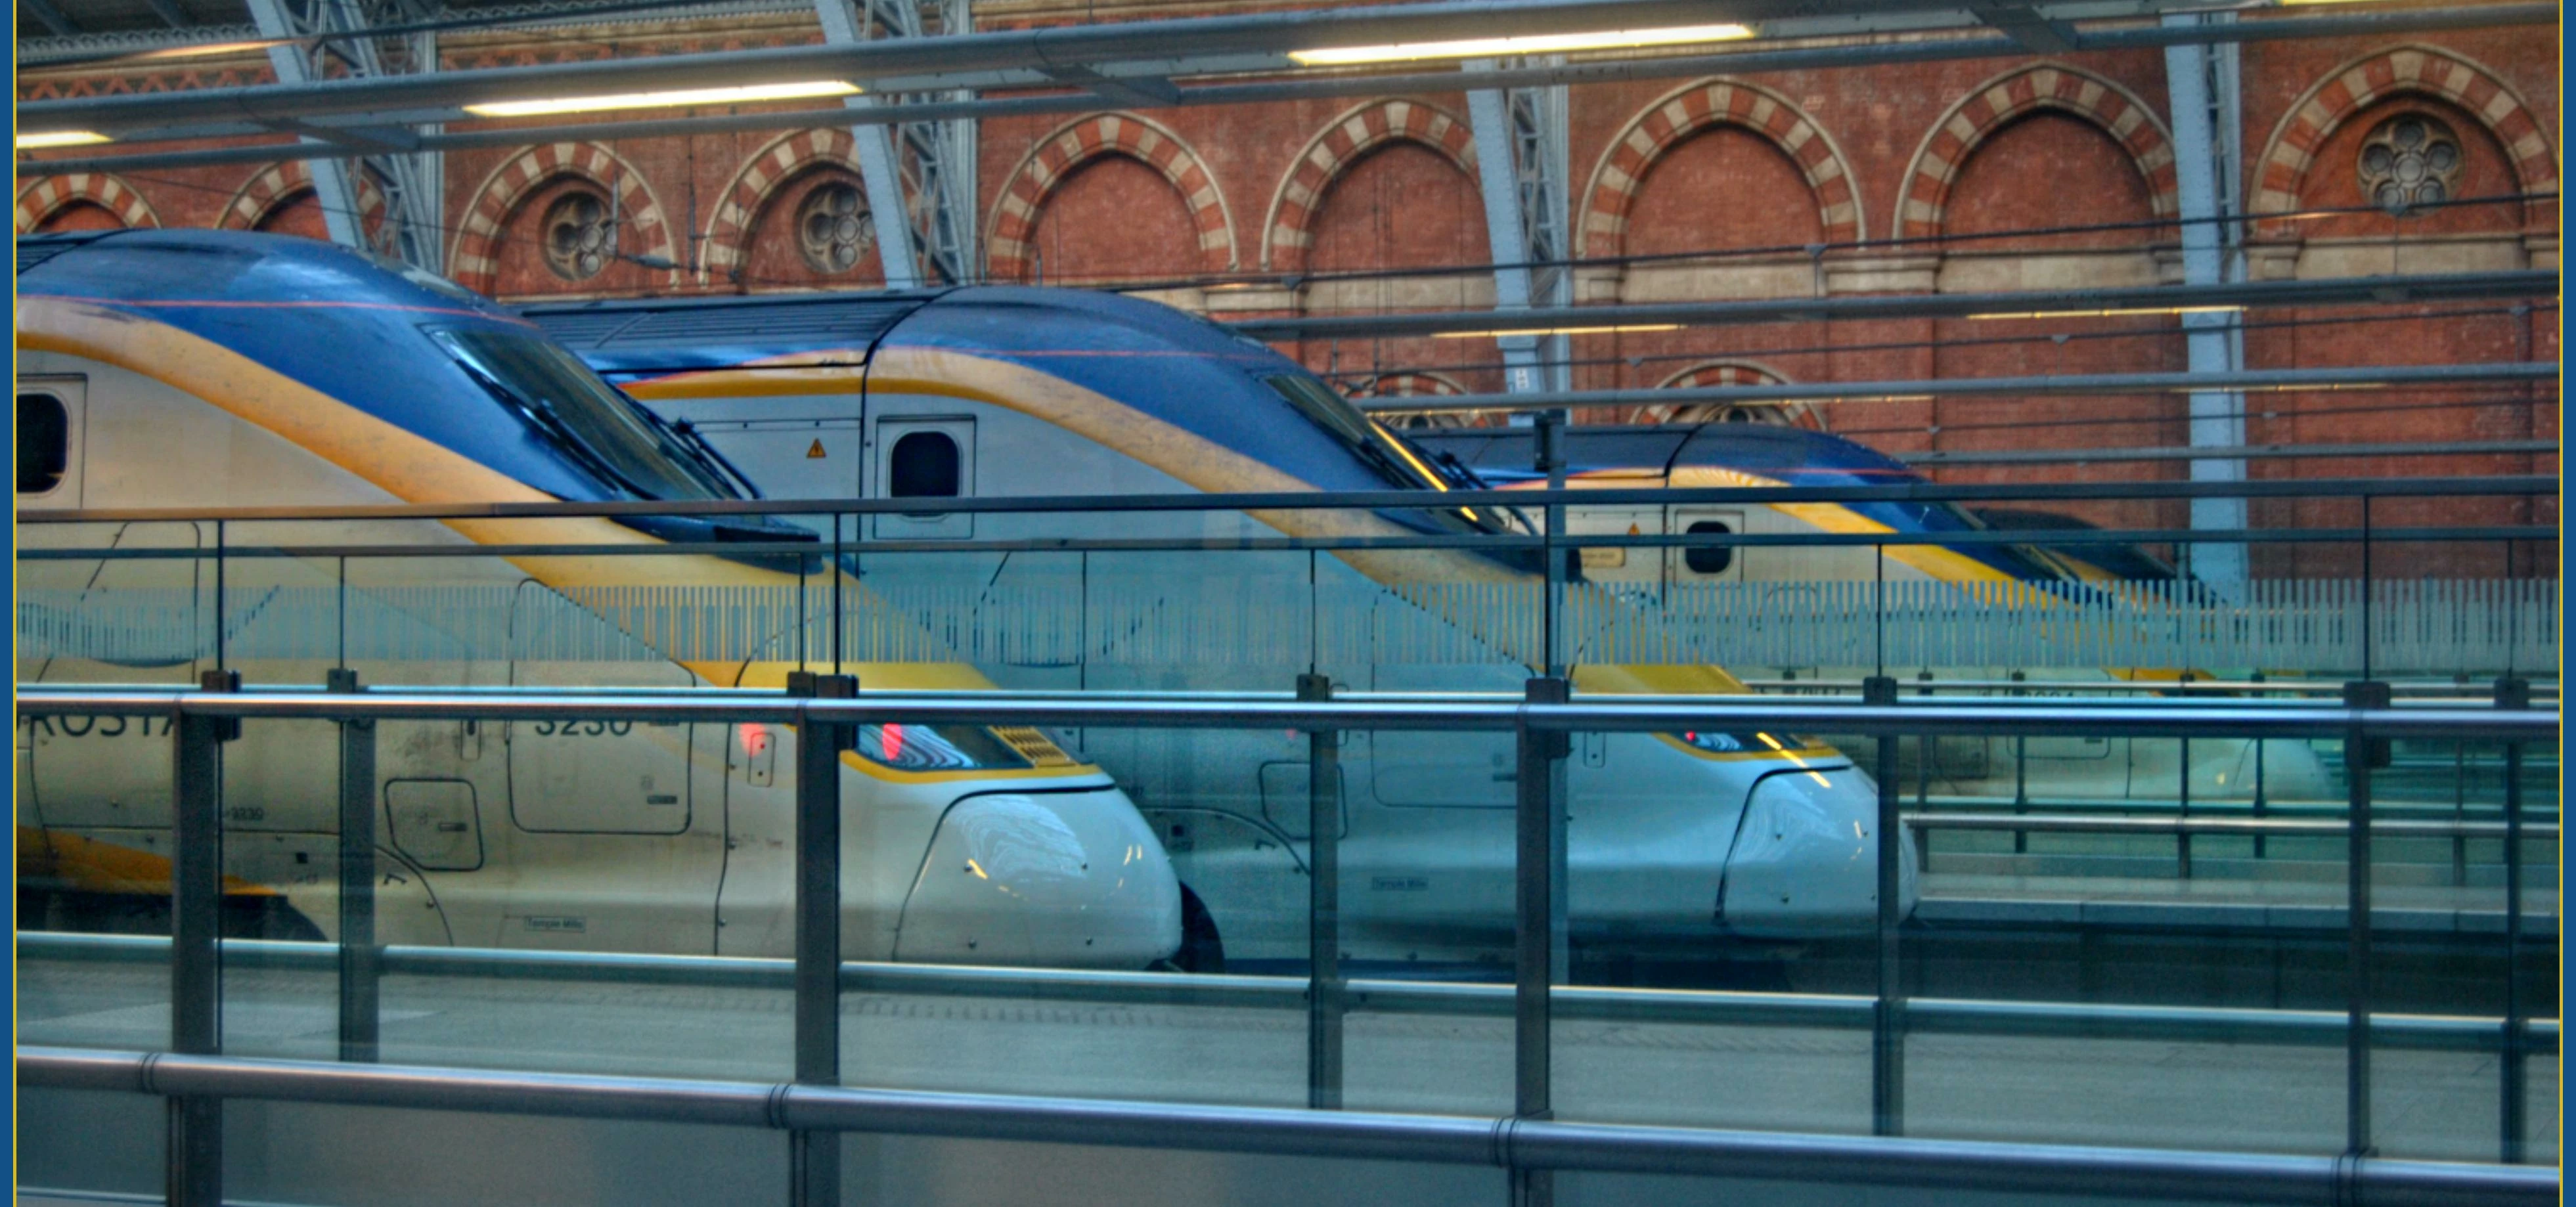 Fire closes Channel Tunnel!  Eurostar trains stranded @ St Pancras London